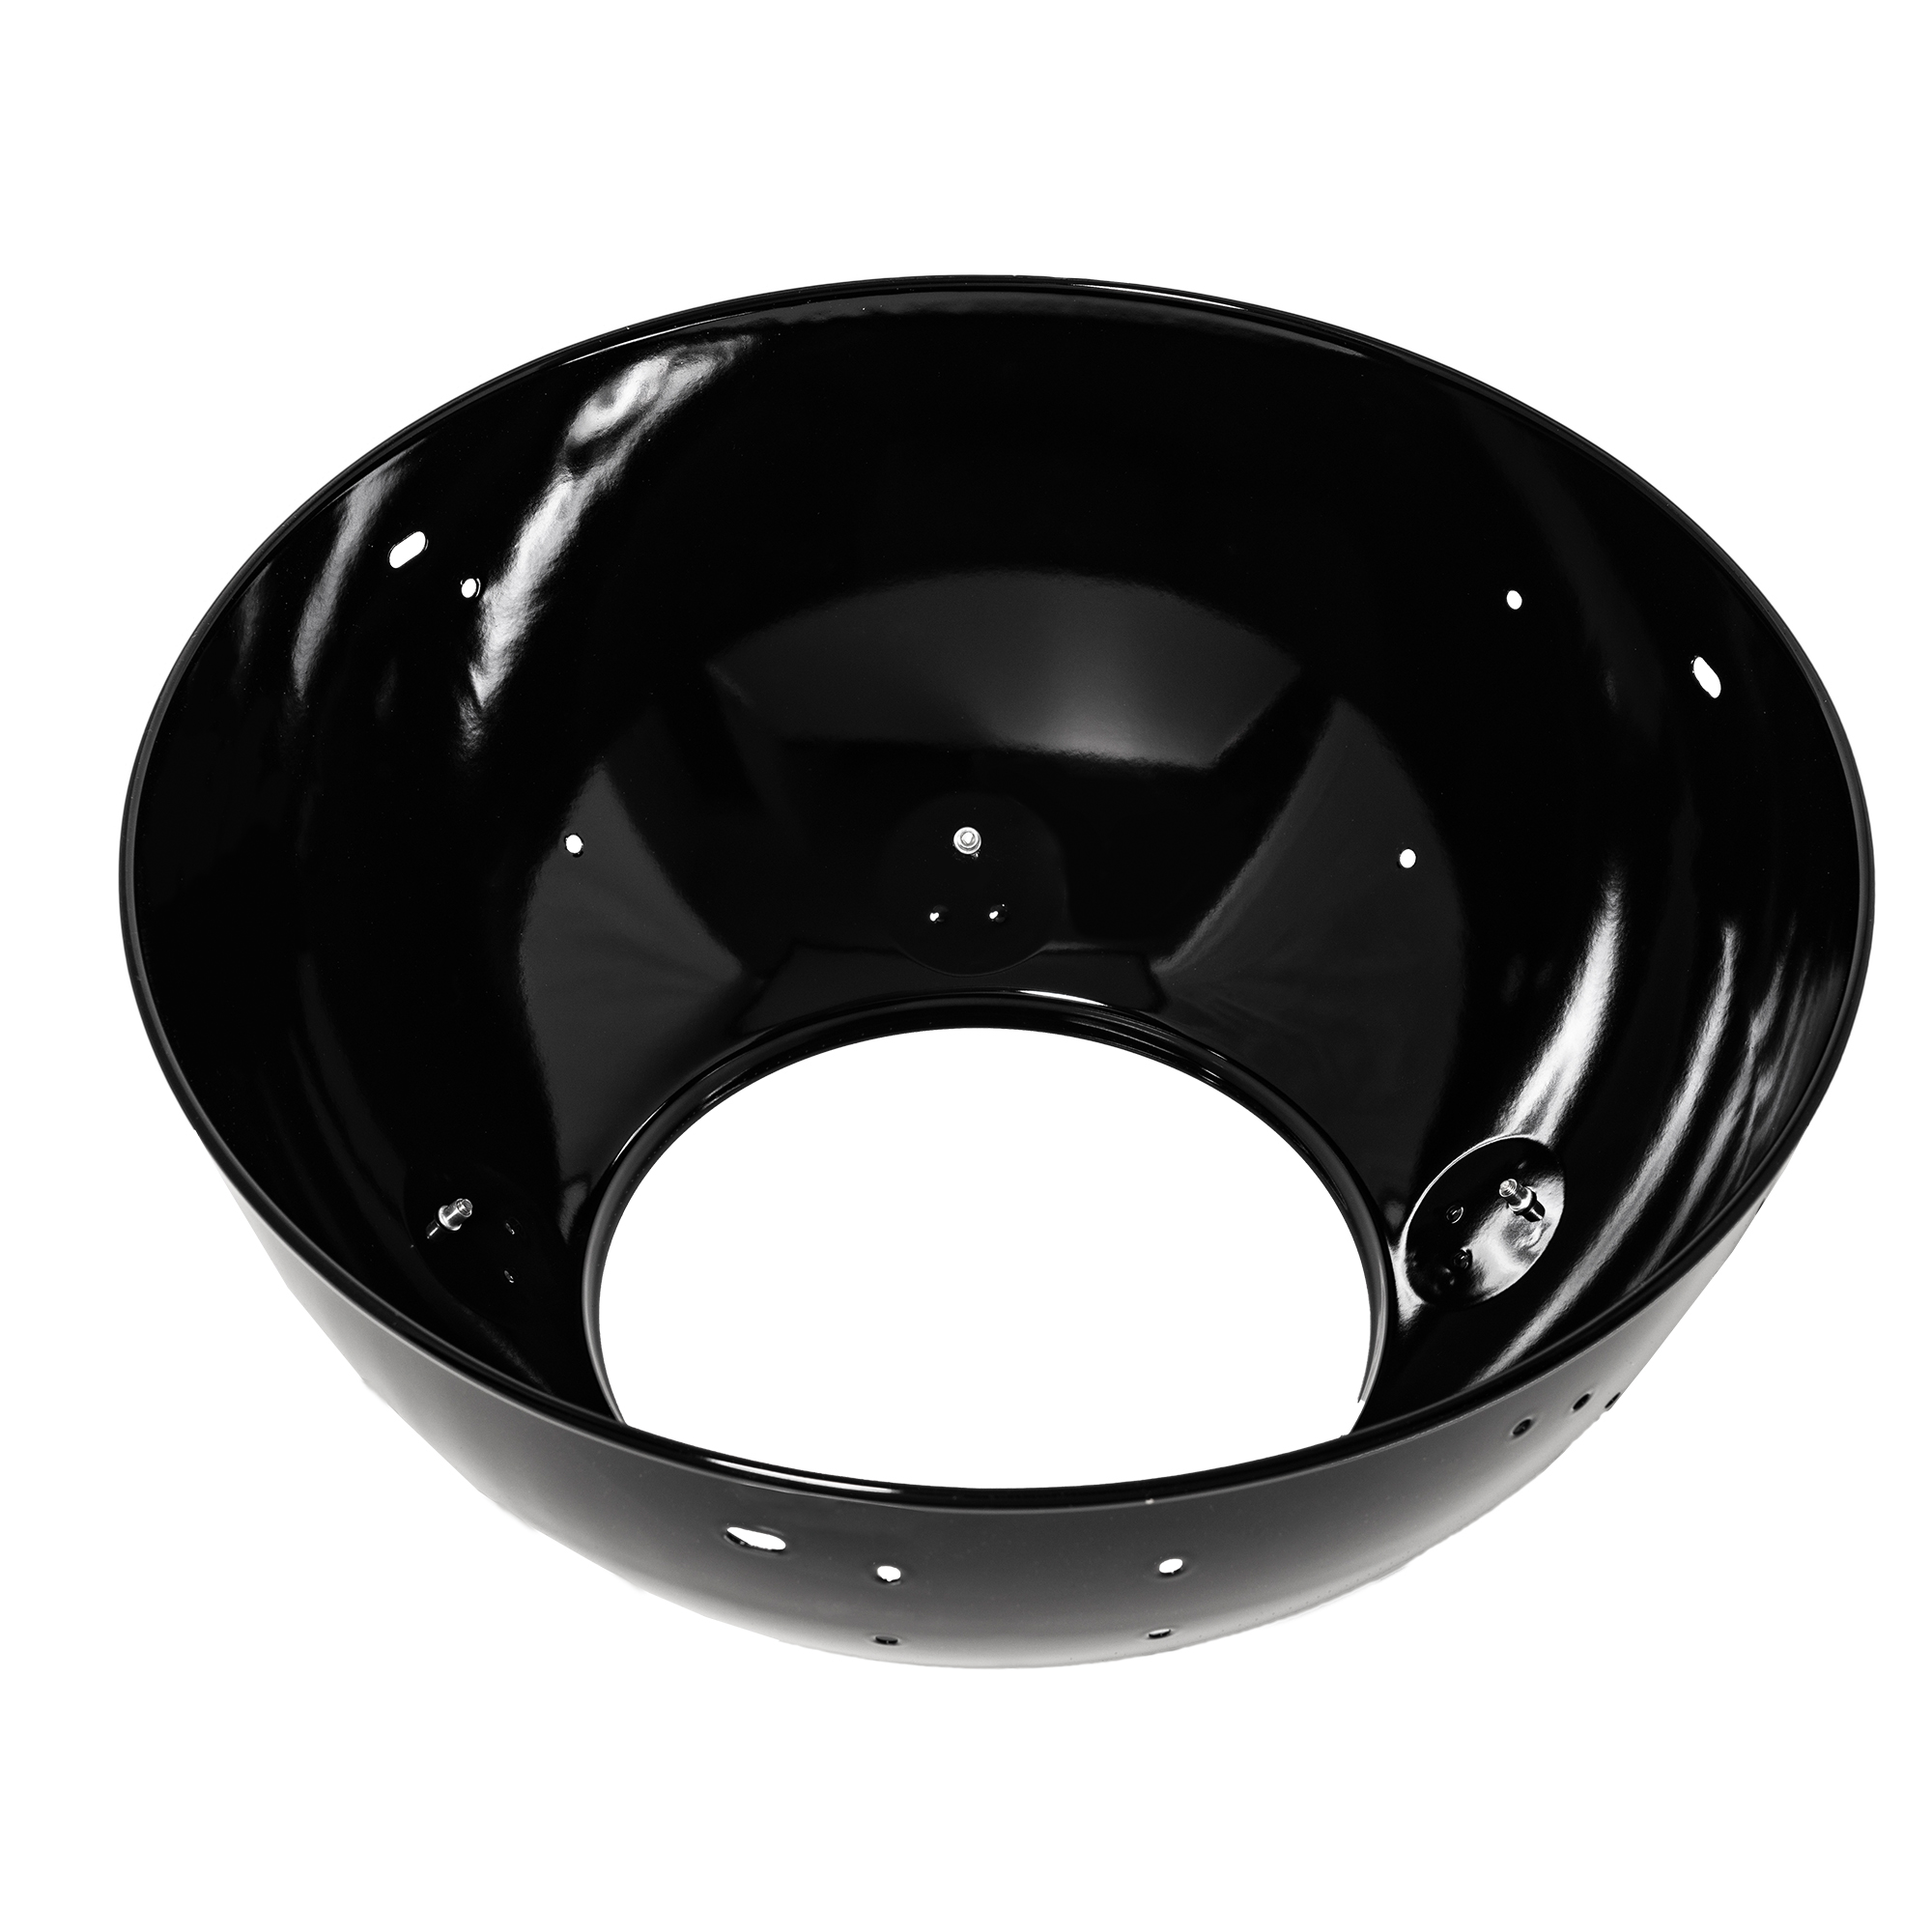 Firebowl AIR F50 w/o mounting parts